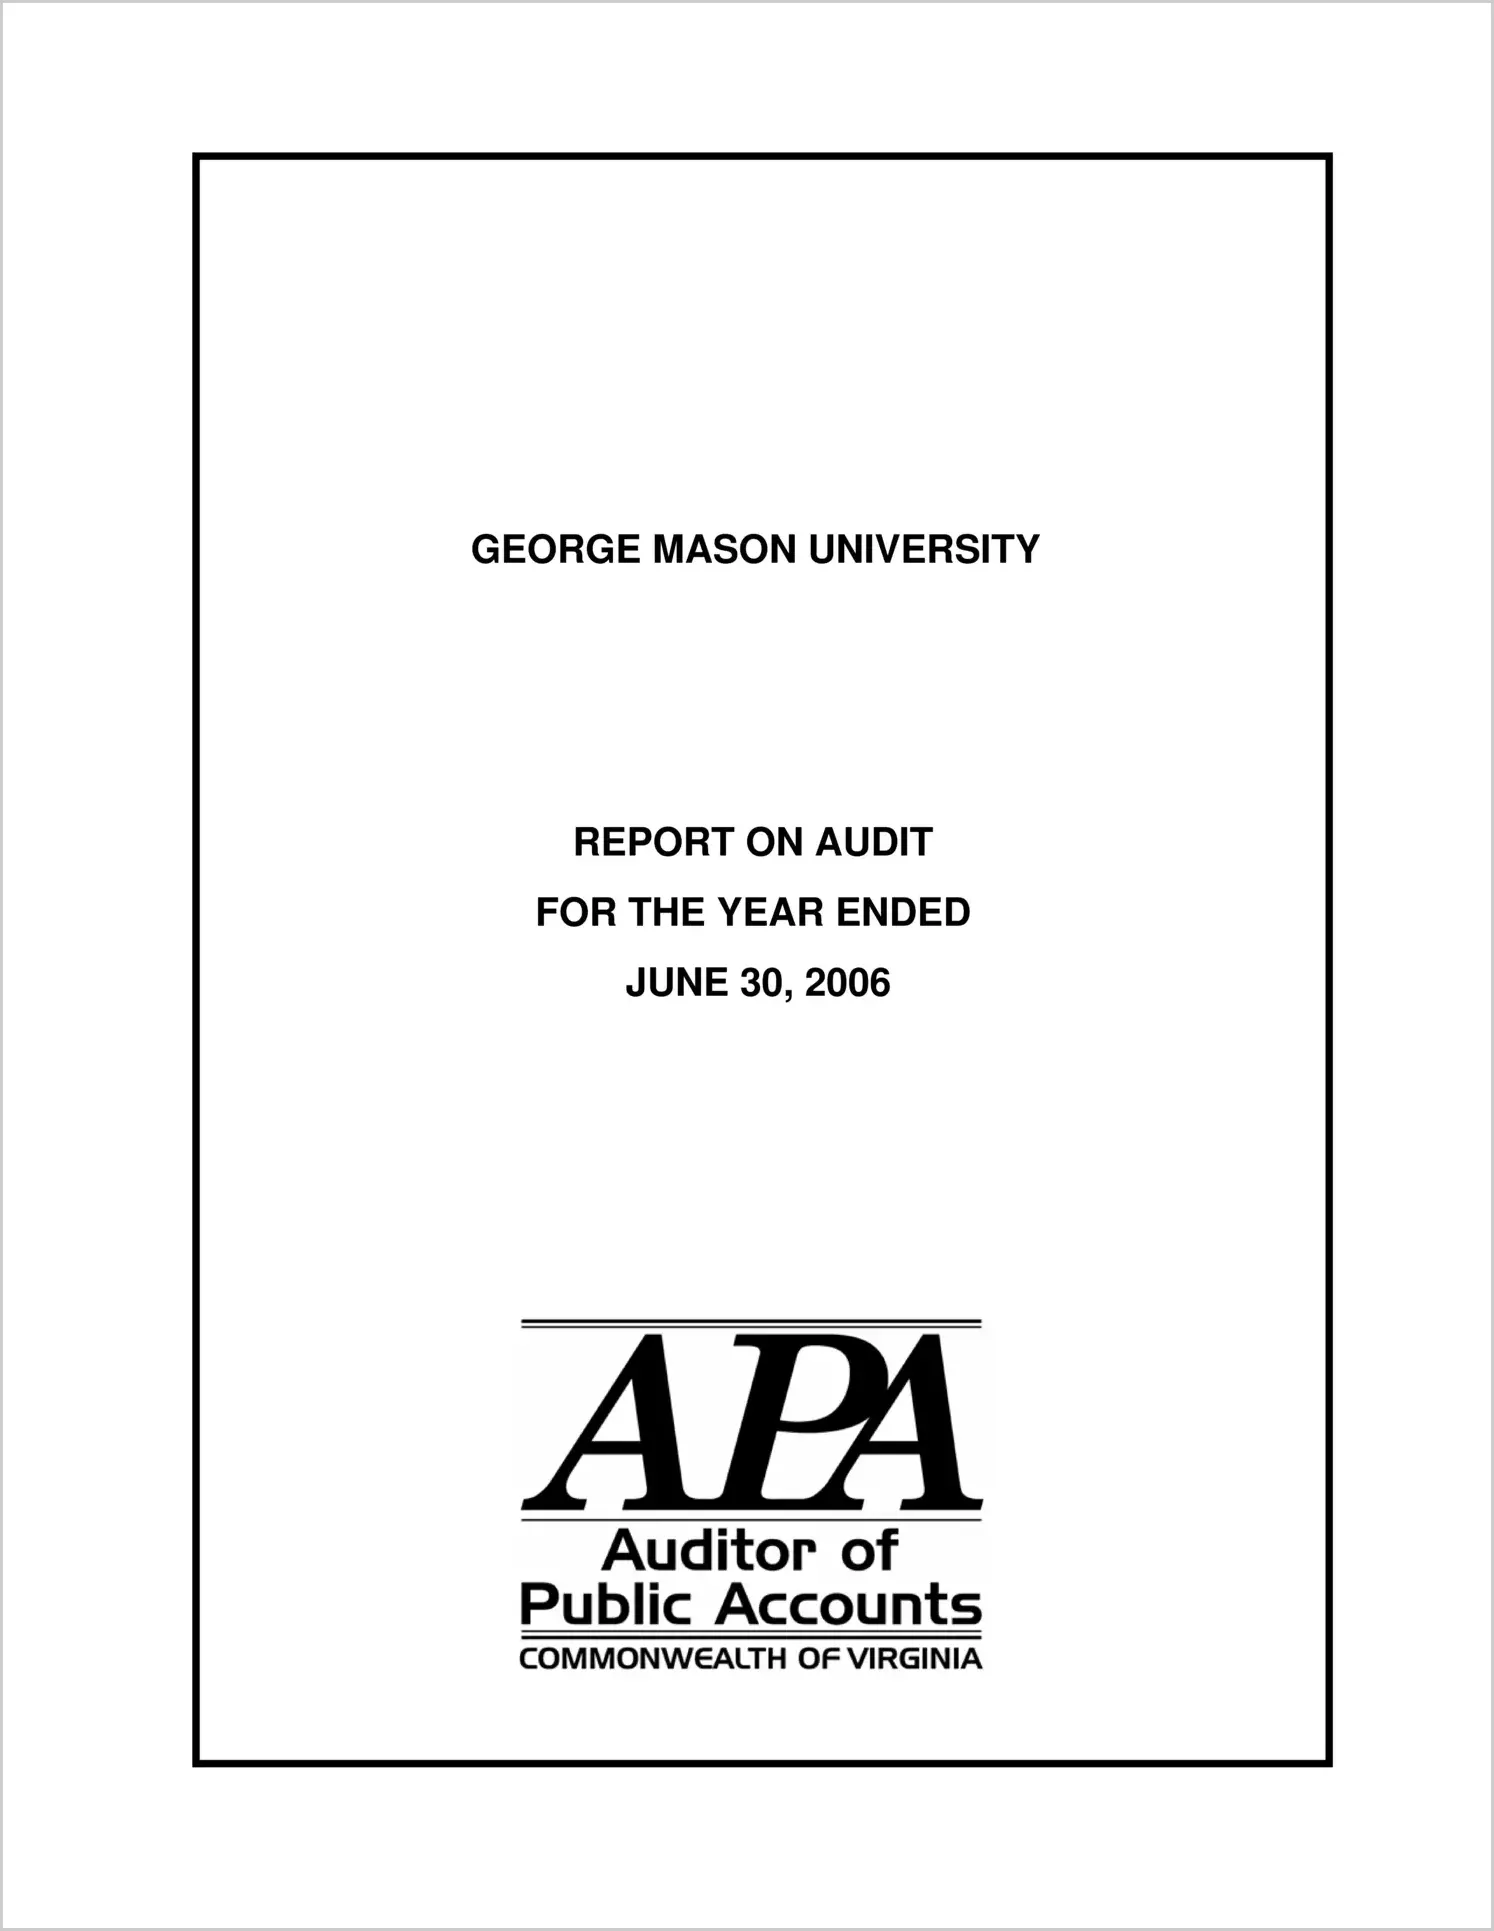 George Mason University  for the year ended June 30, 2006